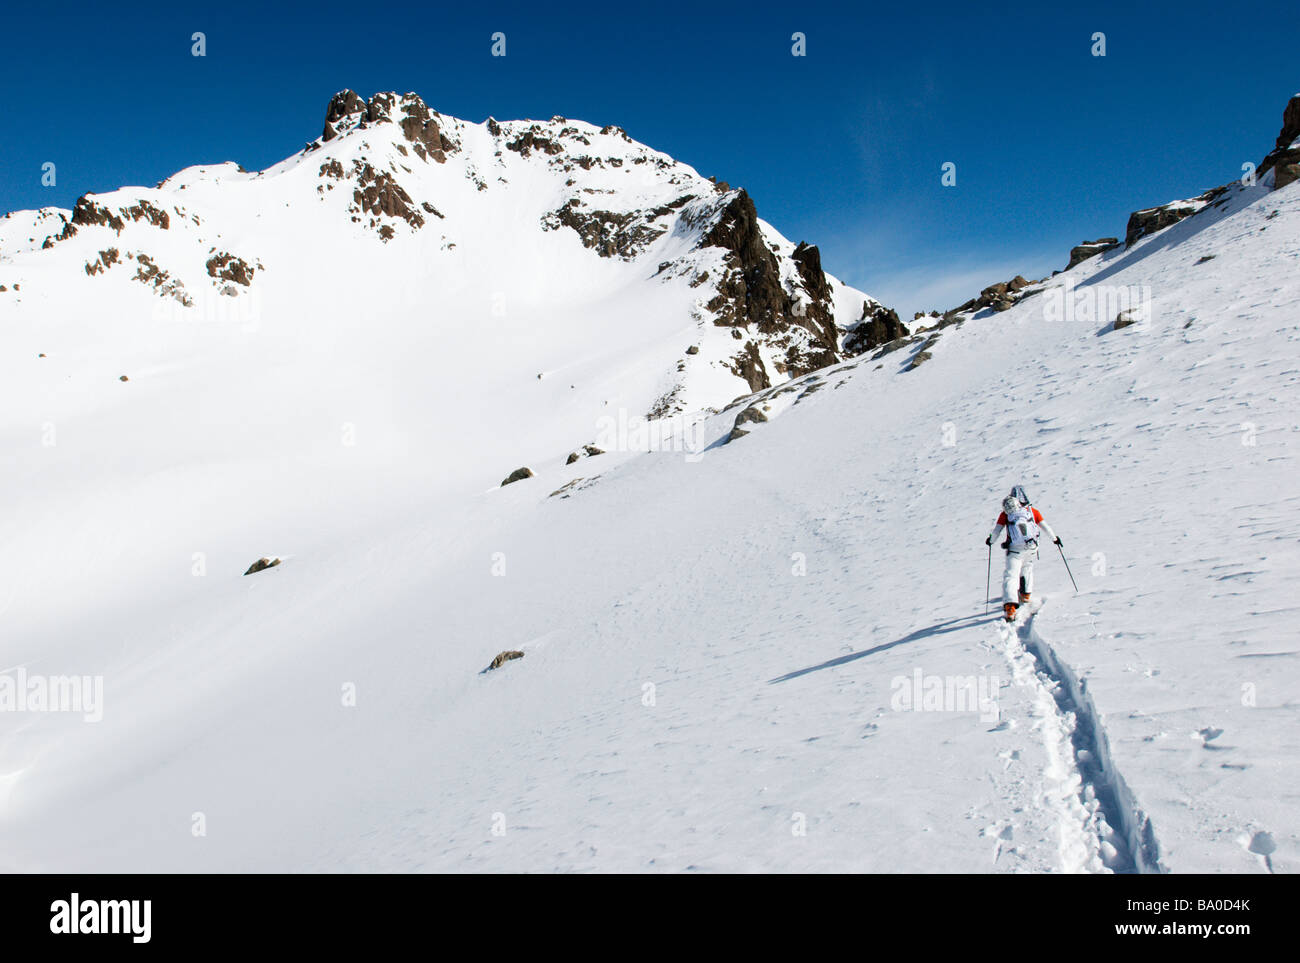 Ski touring in the Aiguilles Rouges Nature Reserve, Chamonix-Mont Blanc, France Stock Photo